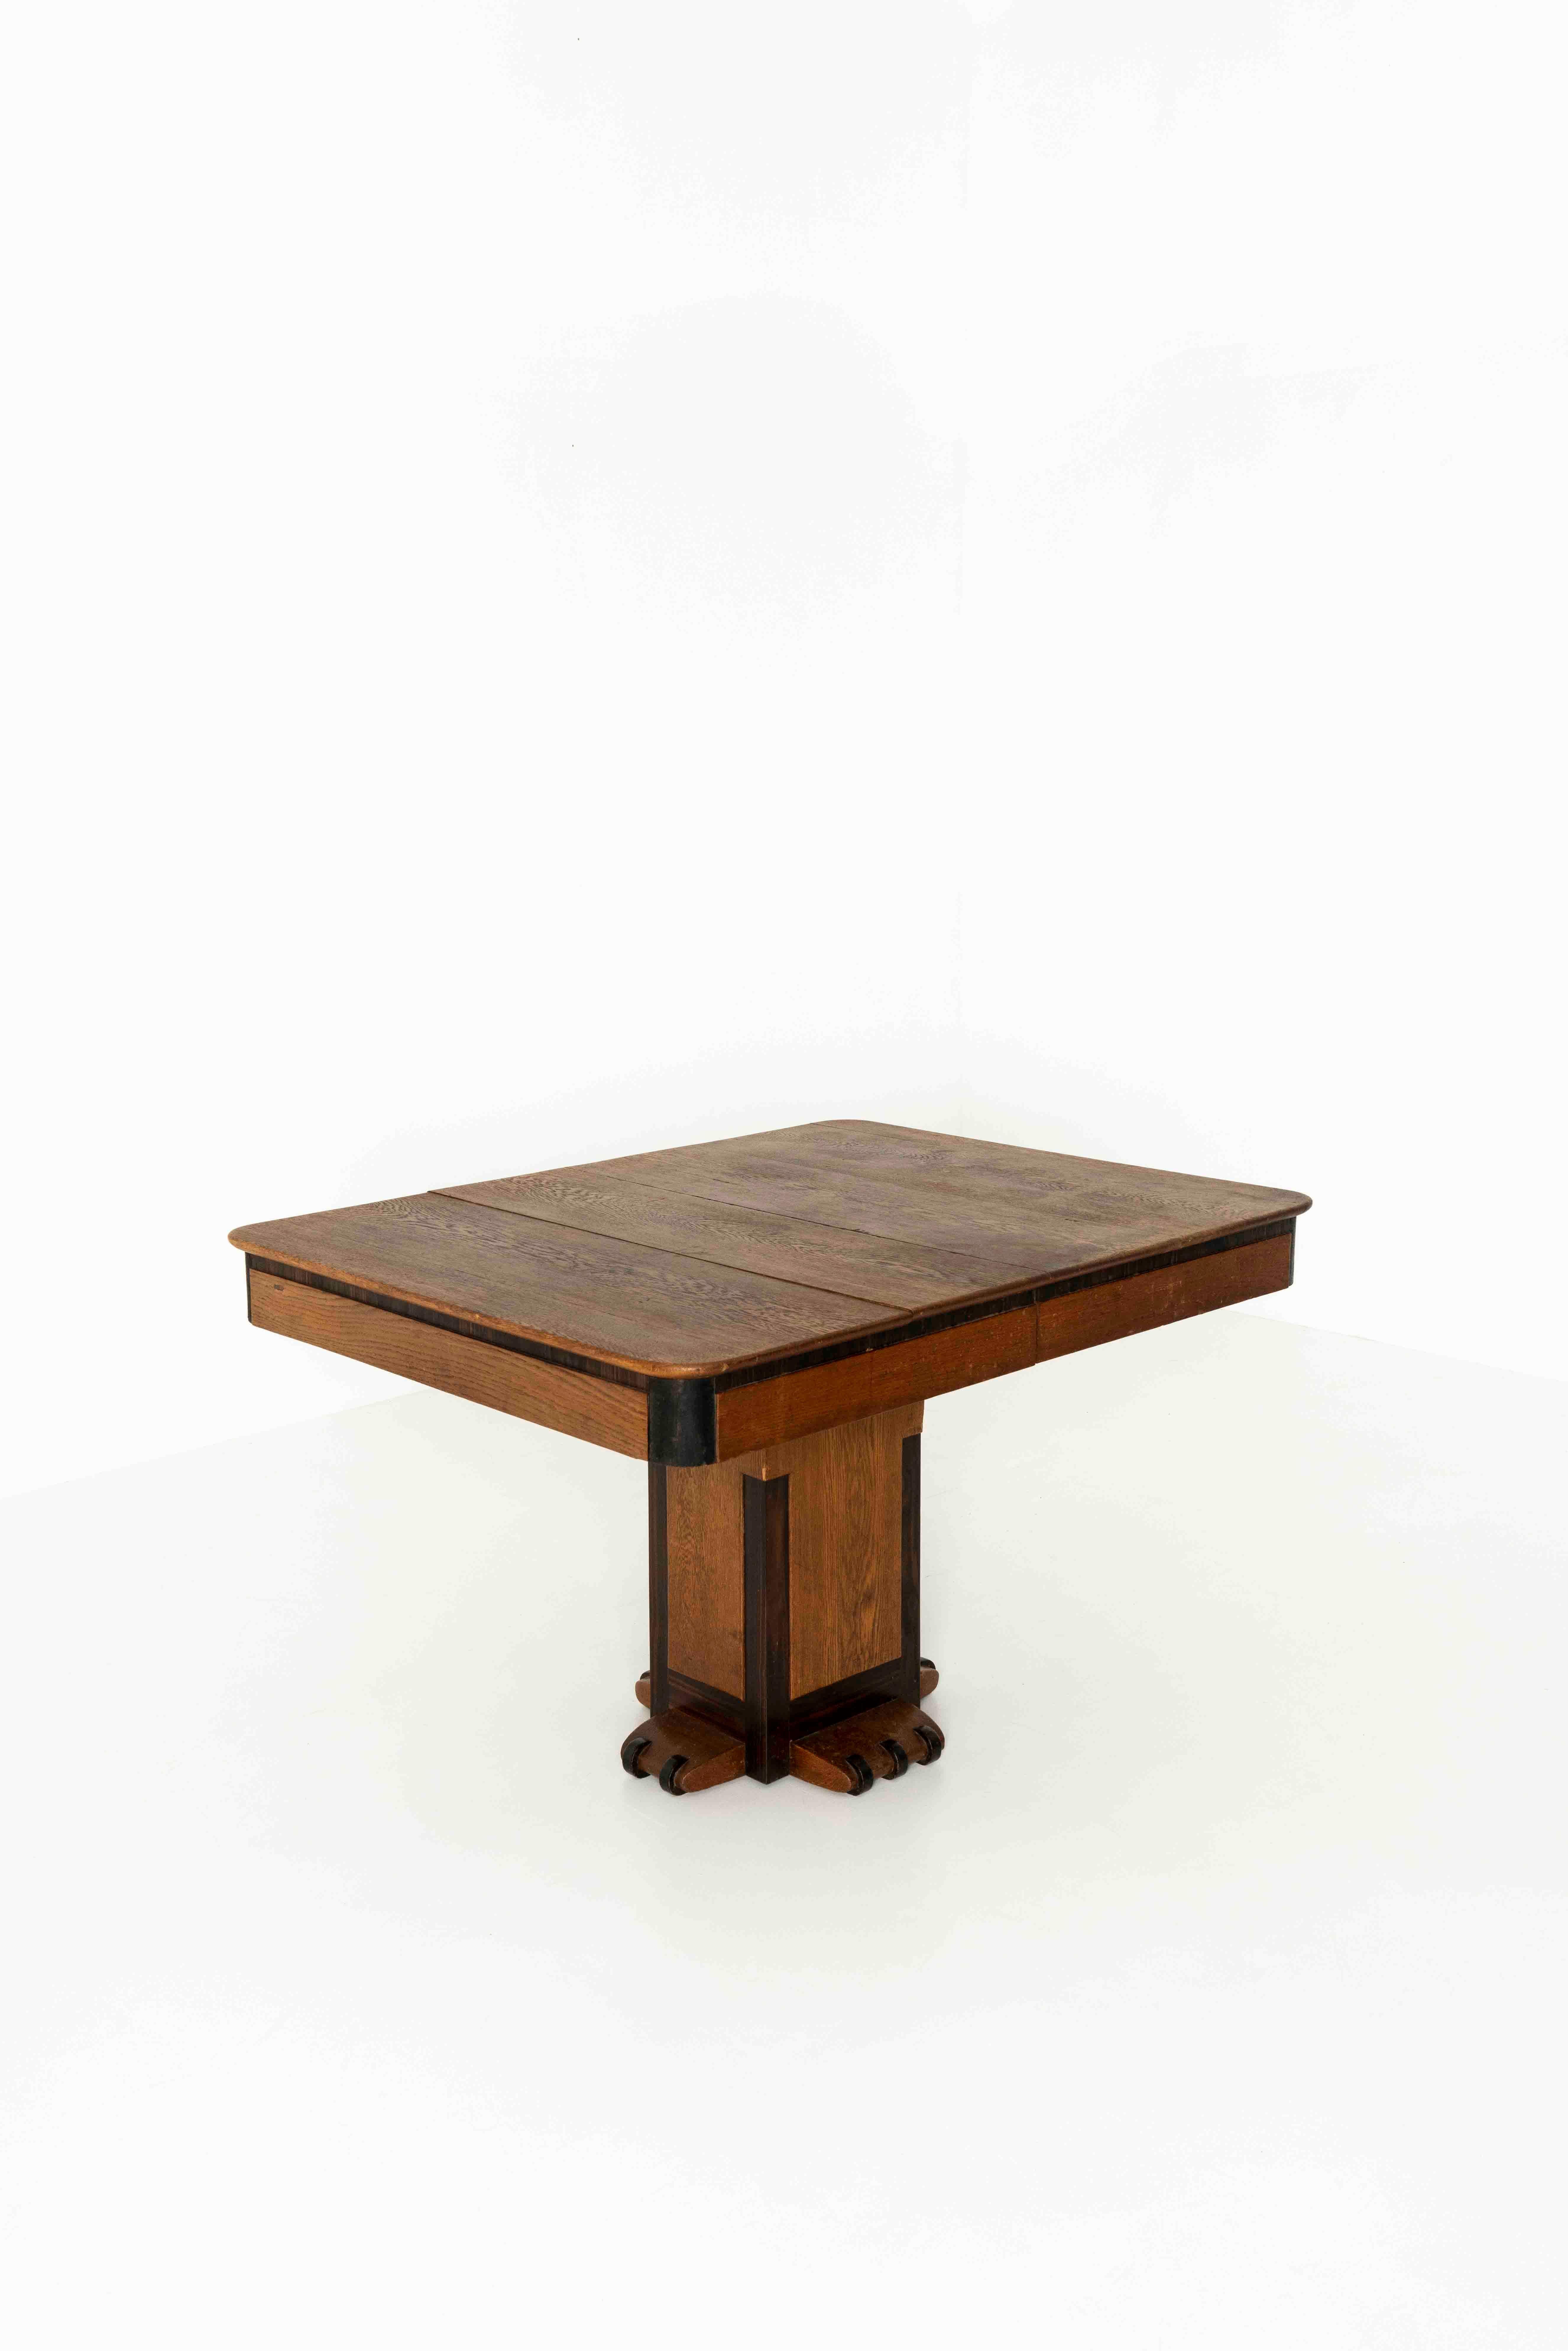 Early 20th Century The Hague School Extendable Dining Table, 1920s